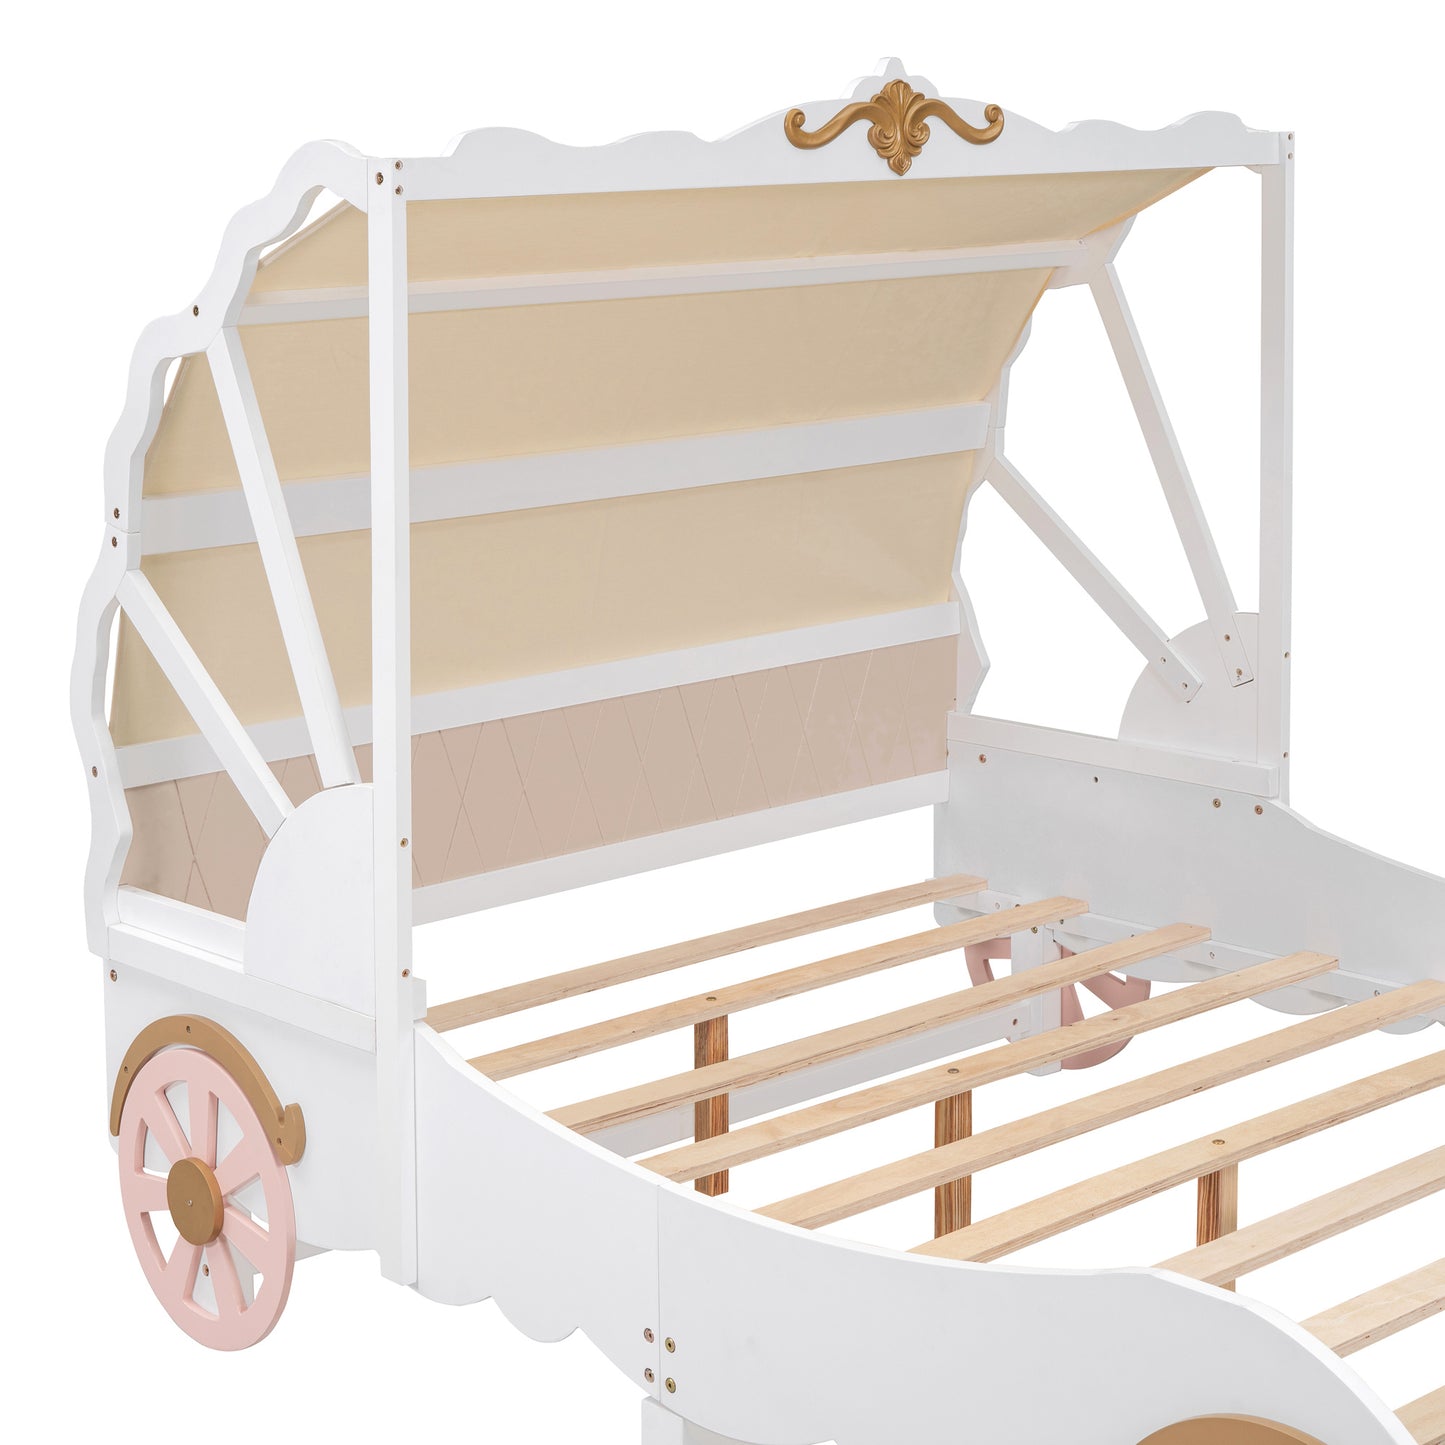 princess carriage bed with canopy, white+pink+gold